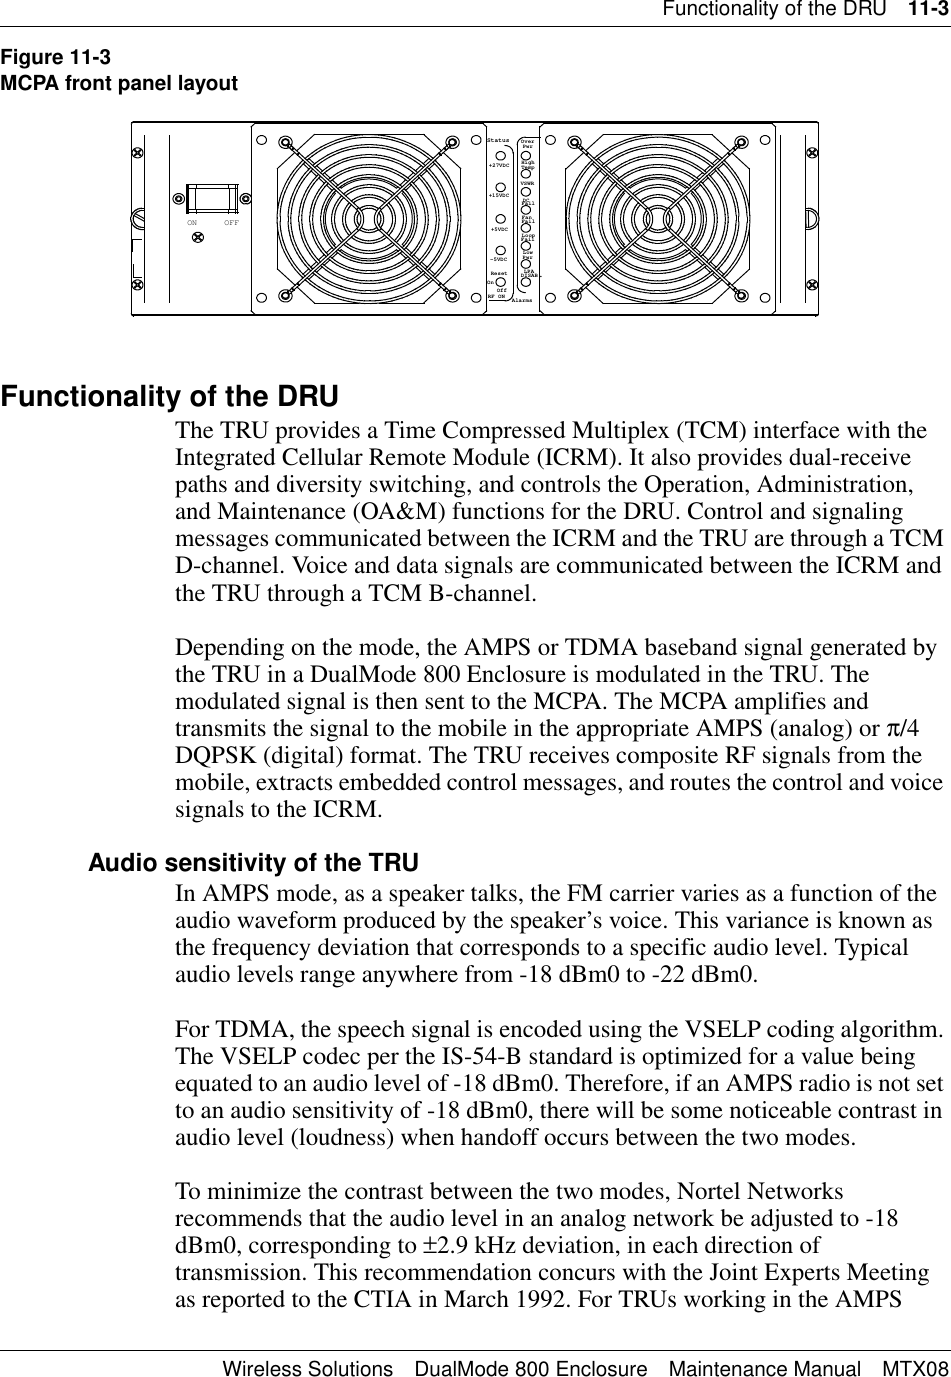 Functionality of the DRU 11-3Wireless Solutions DualMode 800 Enclosure Maintenance Manual MTX08Figure 11-3MCPA front panel layoutFunctionality of the DRUThe TRU provides a Time Compressed Multiplex (TCM) interface with the Integrated Cellular Remote Module (ICRM). It also provides dual-receive paths and diversity switching, and controls the Operation, Administration, and Maintenance (OA&amp;M) functions for the DRU. Control and signaling messages communicated between the ICRM and the TRU are through a TCM D-channel. Voice and data signals are communicated between the ICRM and the TRU through a TCM B-channel.Depending on the mode, the AMPS or TDMA baseband signal generated by the TRU in a DualMode 800 Enclosure is modulated in the TRU. The modulated signal is then sent to the MCPA. The MCPA amplifies and transmits the signal to the mobile in the appropriate AMPS (analog) or π/4 DQPSK (digital) format. The TRU receives composite RF signals from the mobile, extracts embedded control messages, and routes the control and voice signals to the ICRM.Audio sensitivity of the TRUIn AMPS mode, as a speaker talks, the FM carrier varies as a function of the audio waveform produced by the speaker’s voice. This variance is known as the frequency deviation that corresponds to a specific audio level. Typical audio levels range anywhere from -18 dBm0 to -22 dBm0.For TDMA, the speech signal is encoded using the VSELP coding algorithm. The VSELP codec per the IS-54-B standard is optimized for a value being equated to an audio level of -18 dBm0. Therefore, if an AMPS radio is not set to an audio sensitivity of -18 dBm0, there will be some noticeable contrast in audio level (loudness) when handoff occurs between the two modes.To minimize the contrast between the two modes, Nortel Networks recommends that the audio level in an analog network be adjusted to -18 dBm0, corresponding to ±2.9 kHz deviation, in each direction of transmission. This recommendation concurs with the Joint Experts Meeting as reported to the CTIA in March 1992. For TRUs working in the AMPS OFFONPwrLowDISAB.AlarmsOffOnRF ON-5VDCResetPwrLPA+5VDC LoopFailFailFanFail+15VDC+27VDCVSWRDCHighTempOverStatus